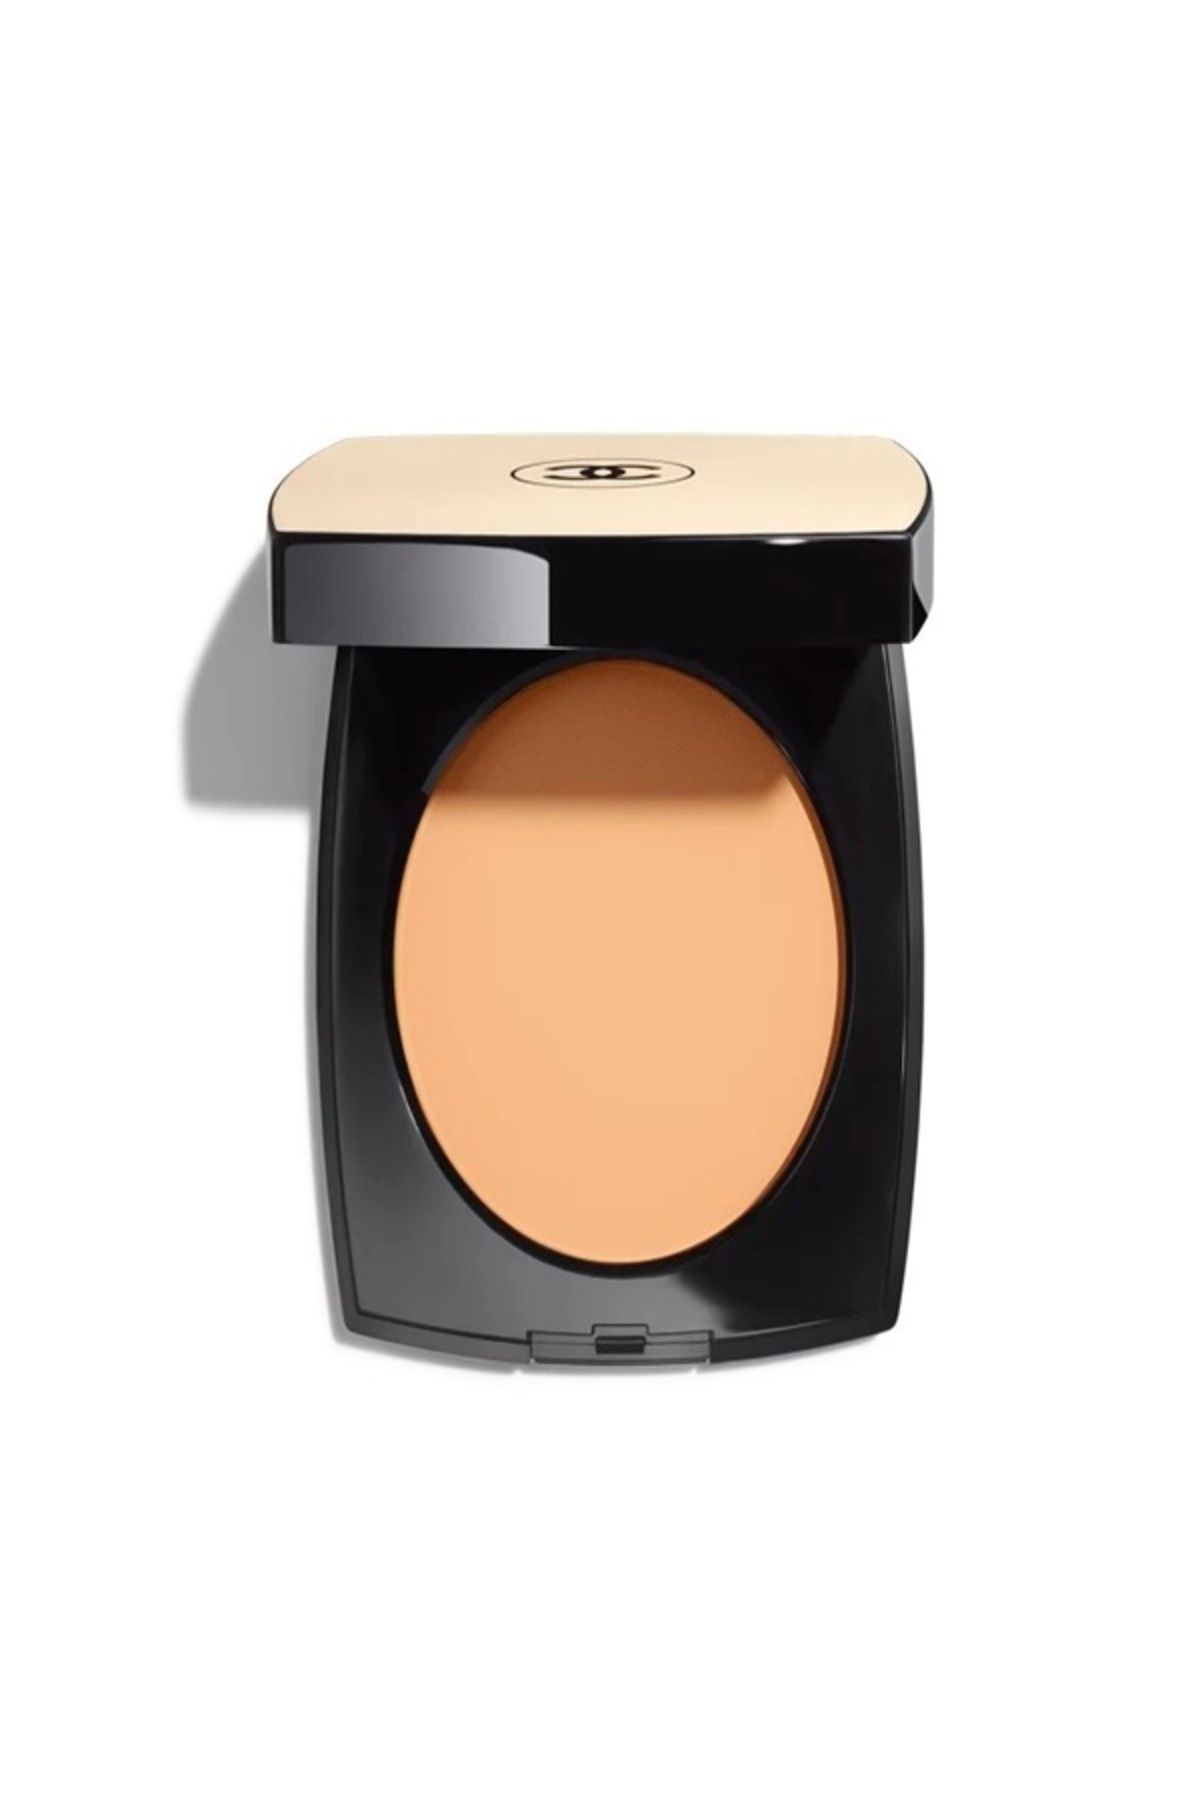 Chanel LES BEIGES HEALTHY GLOW SHEER POWDER 12g Pudra